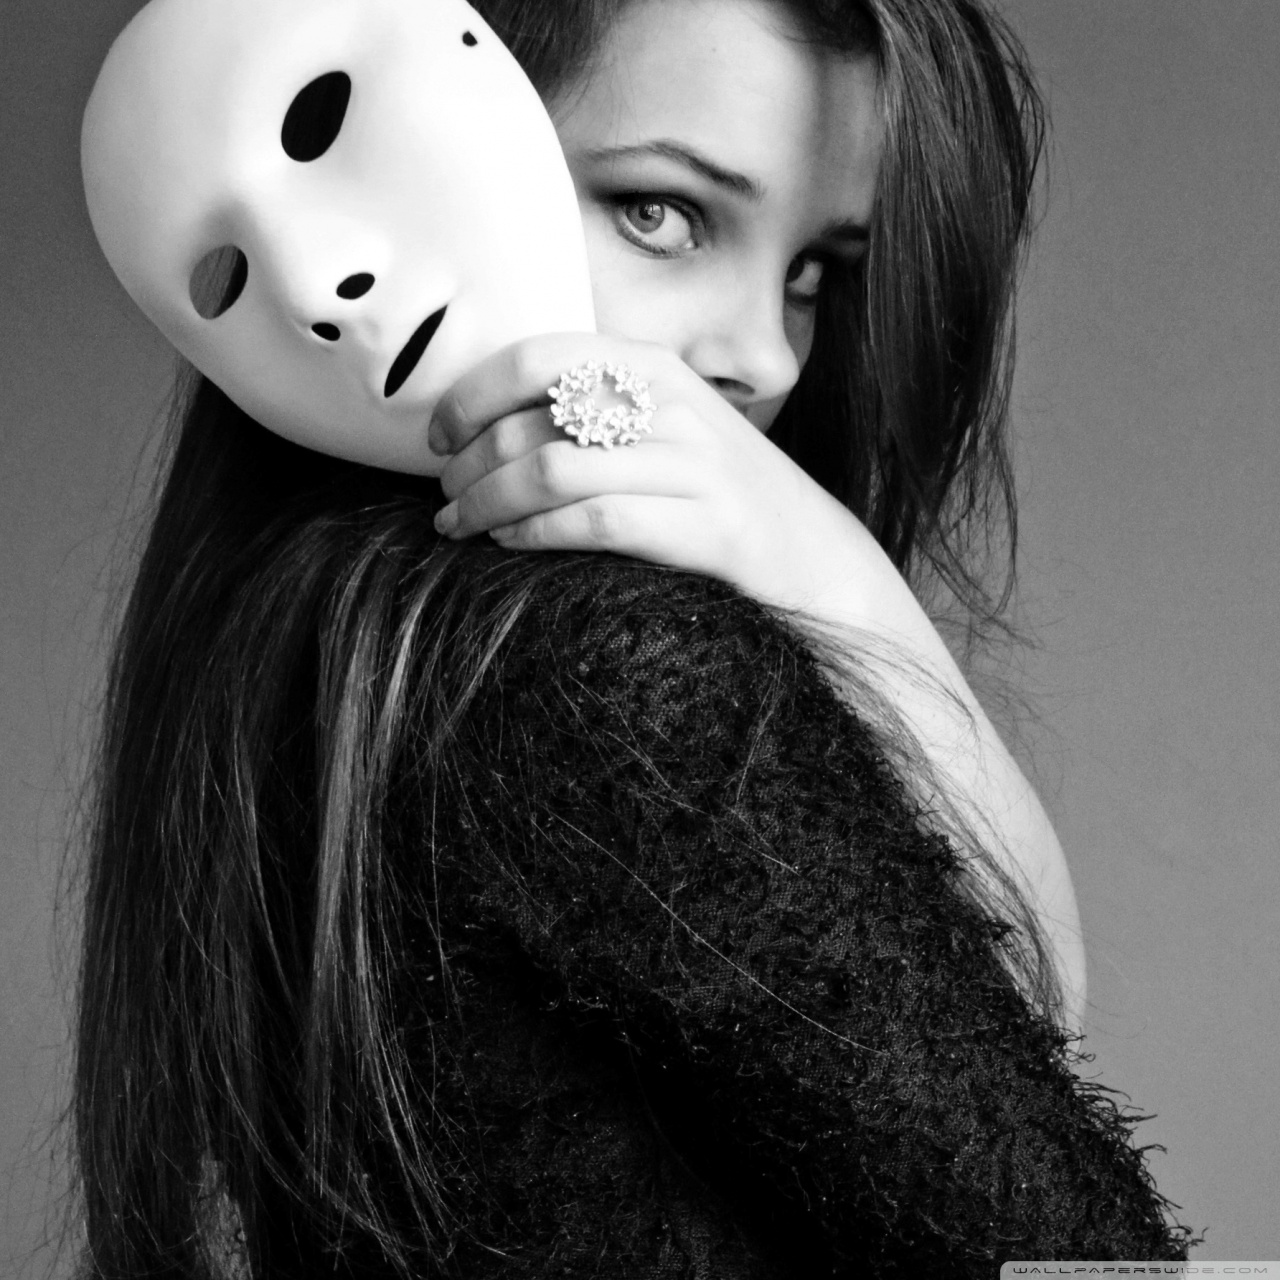 Ipad - Girl Behind The Mask , HD Wallpaper & Backgrounds